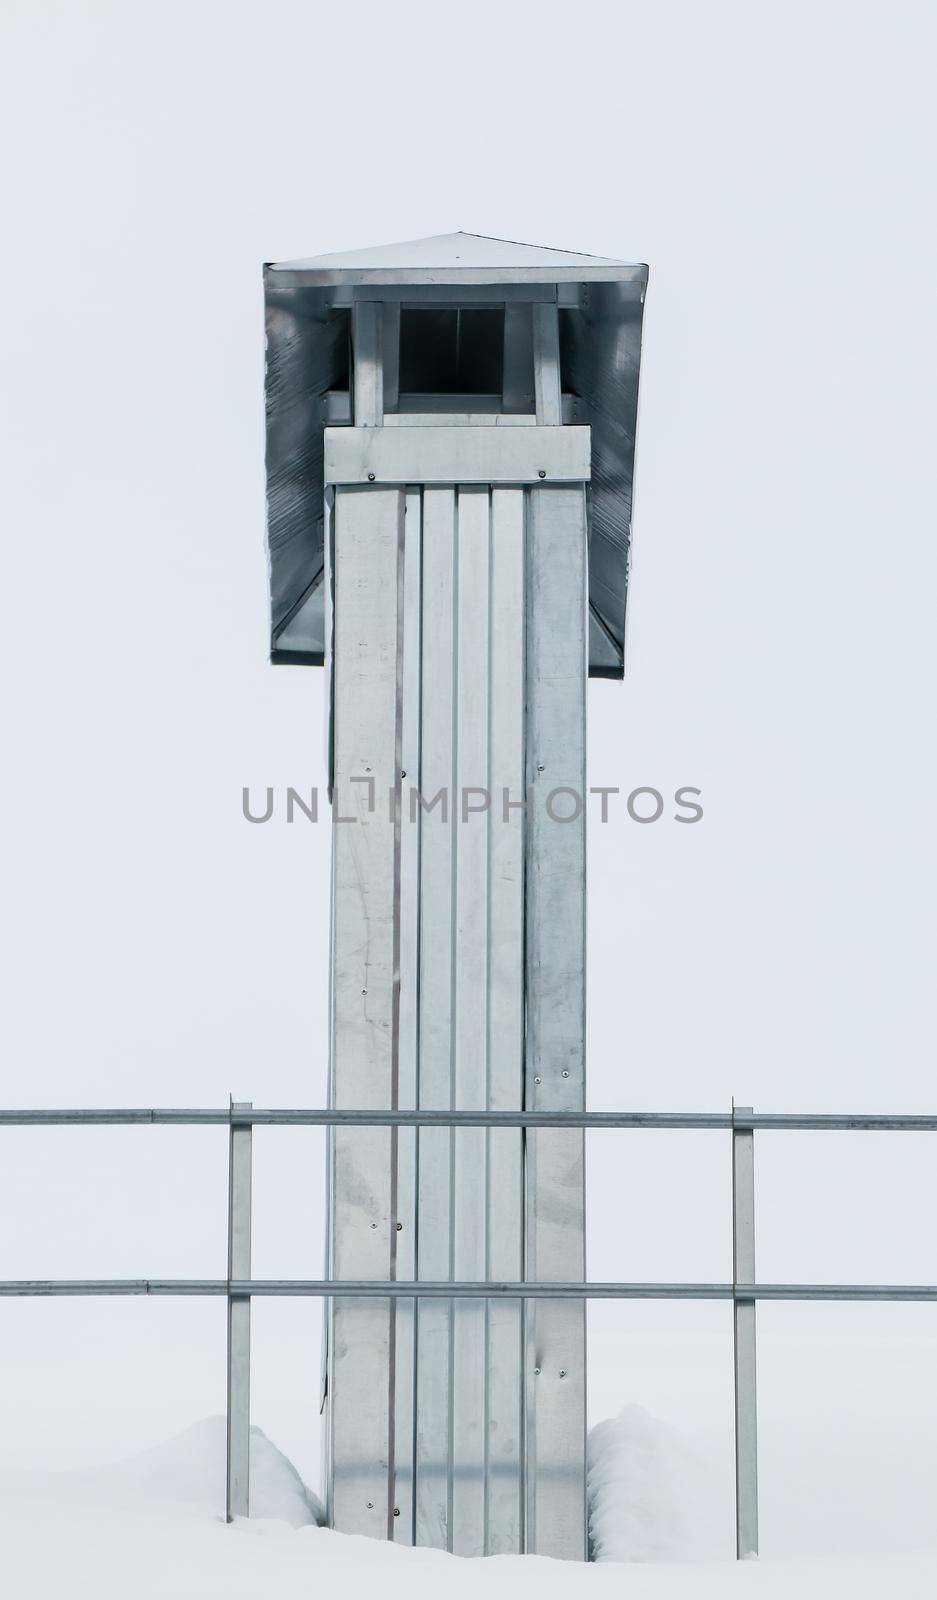 Rectangular metal chimney on the roof of the house. There is white snow on the surface. Against the background of a gray sky. Cloudy winter day, soft light.